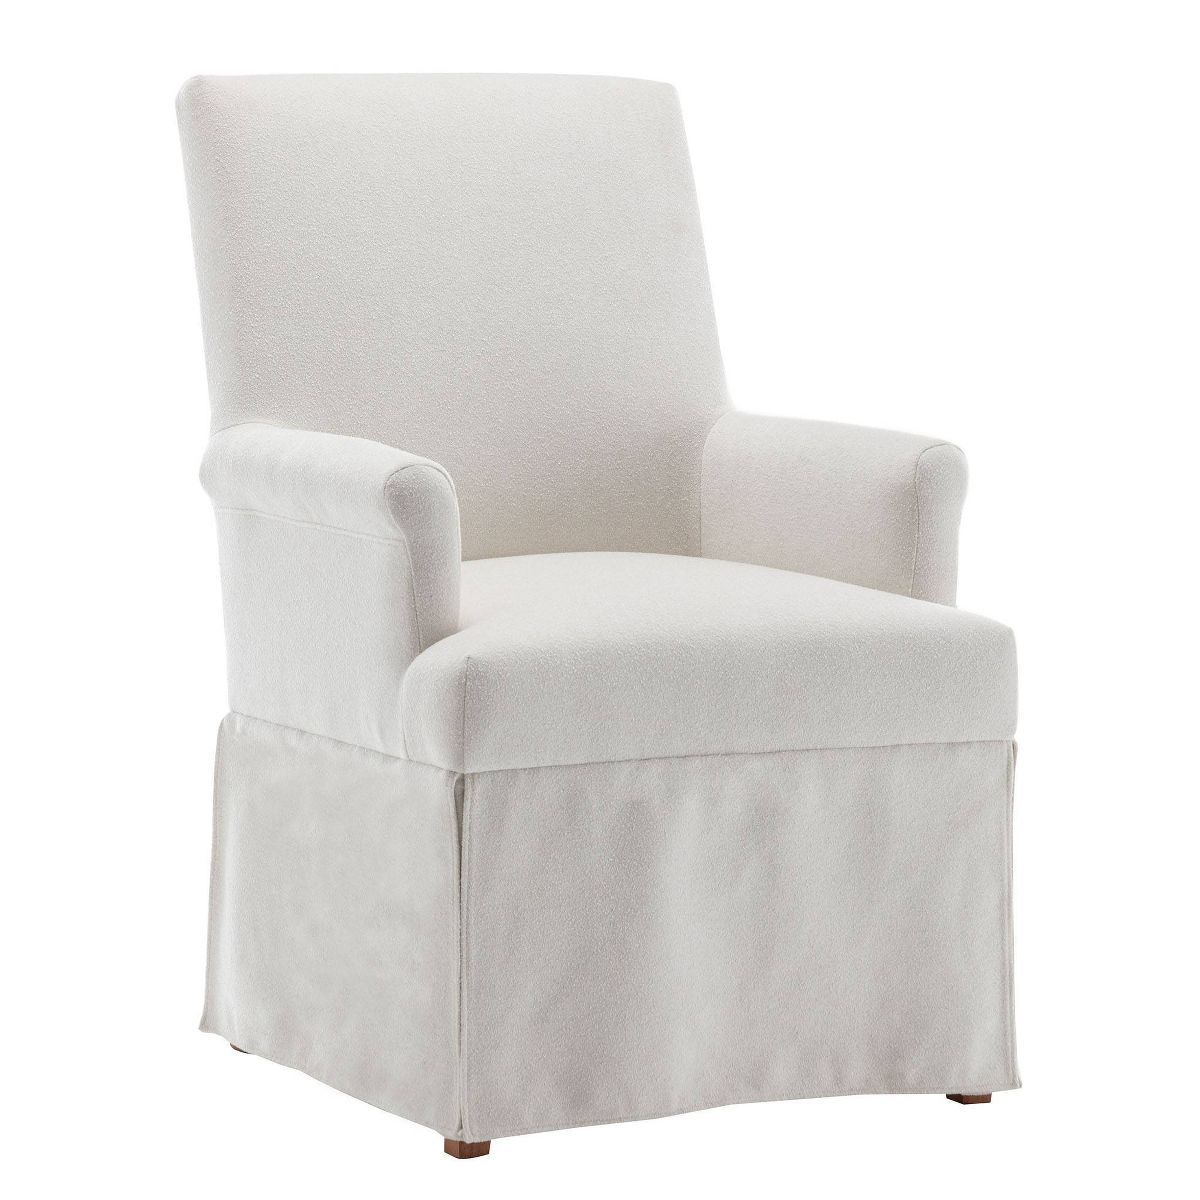 Classic Covered Dining Arm Chair - WOVENBYRD | Target